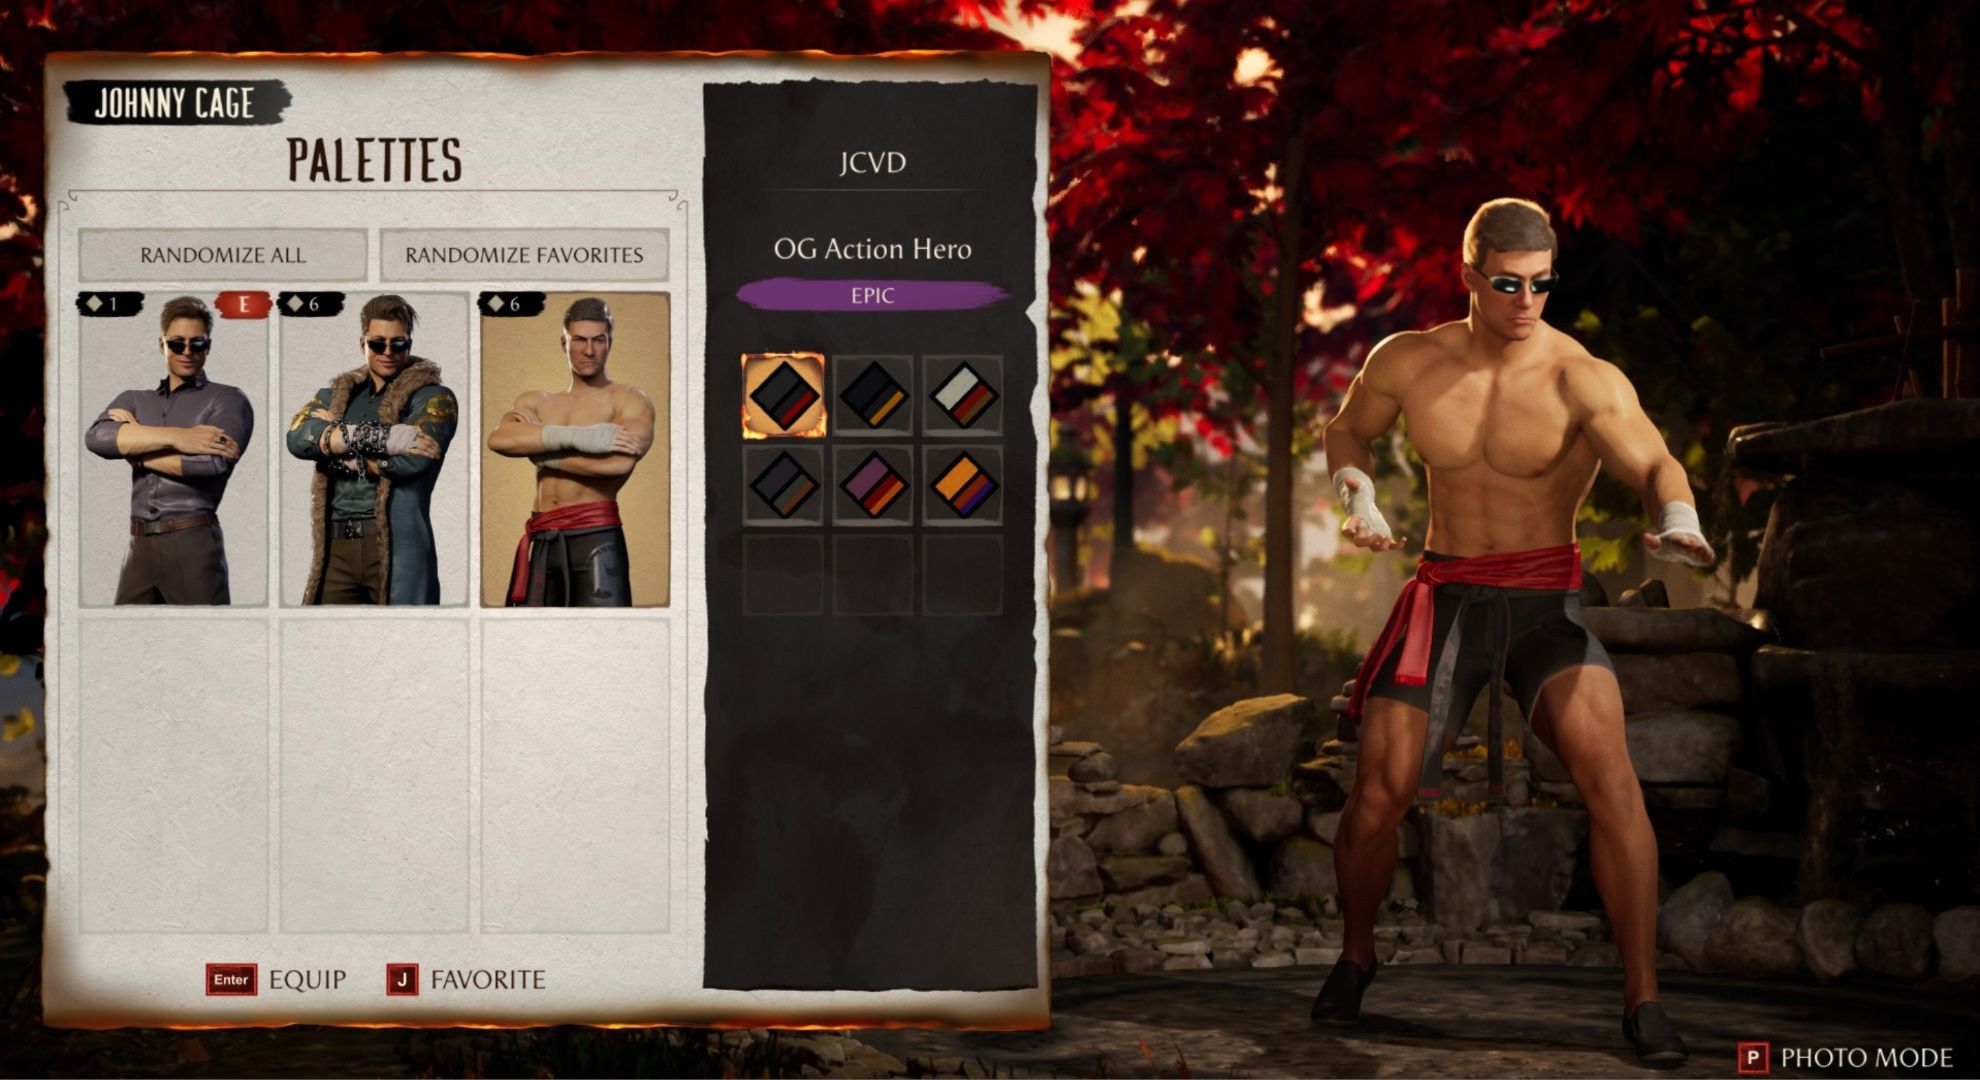 The Jean-Claude Van Damme skin and its various Palettes in Mortal Kombat 1.